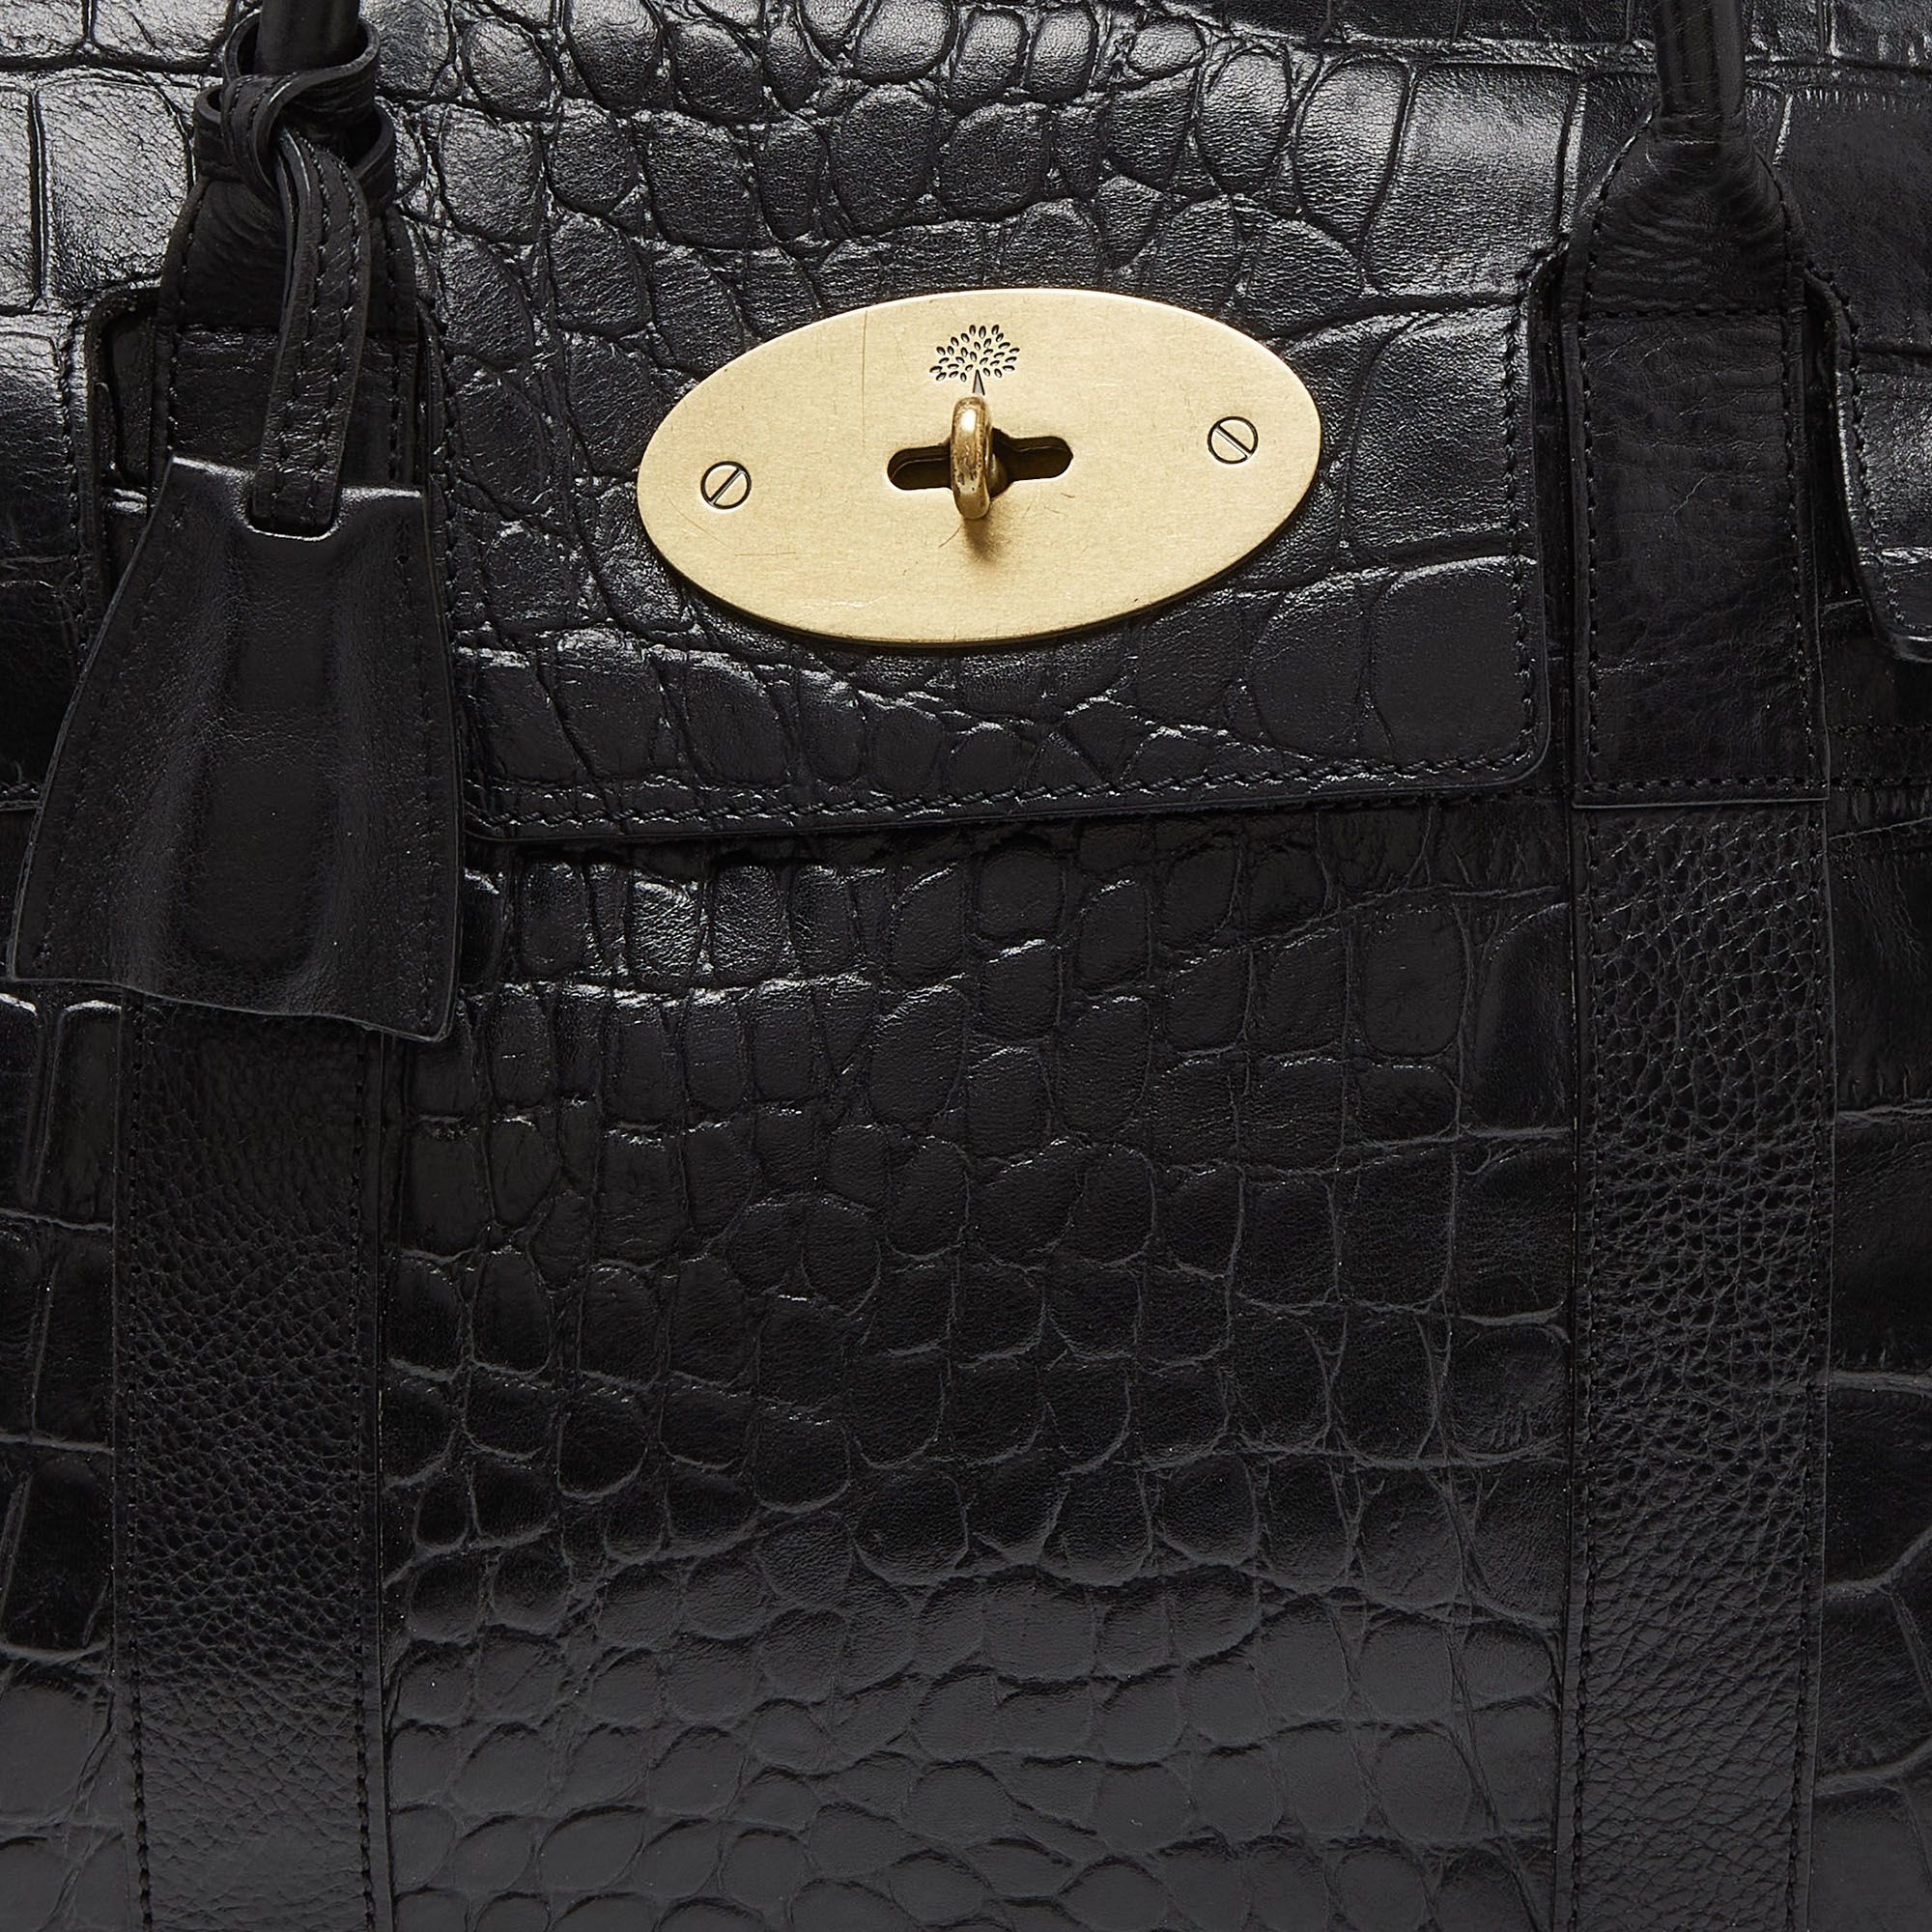 Mulberry Black Croc Embossed Leather Bayswater Satchel